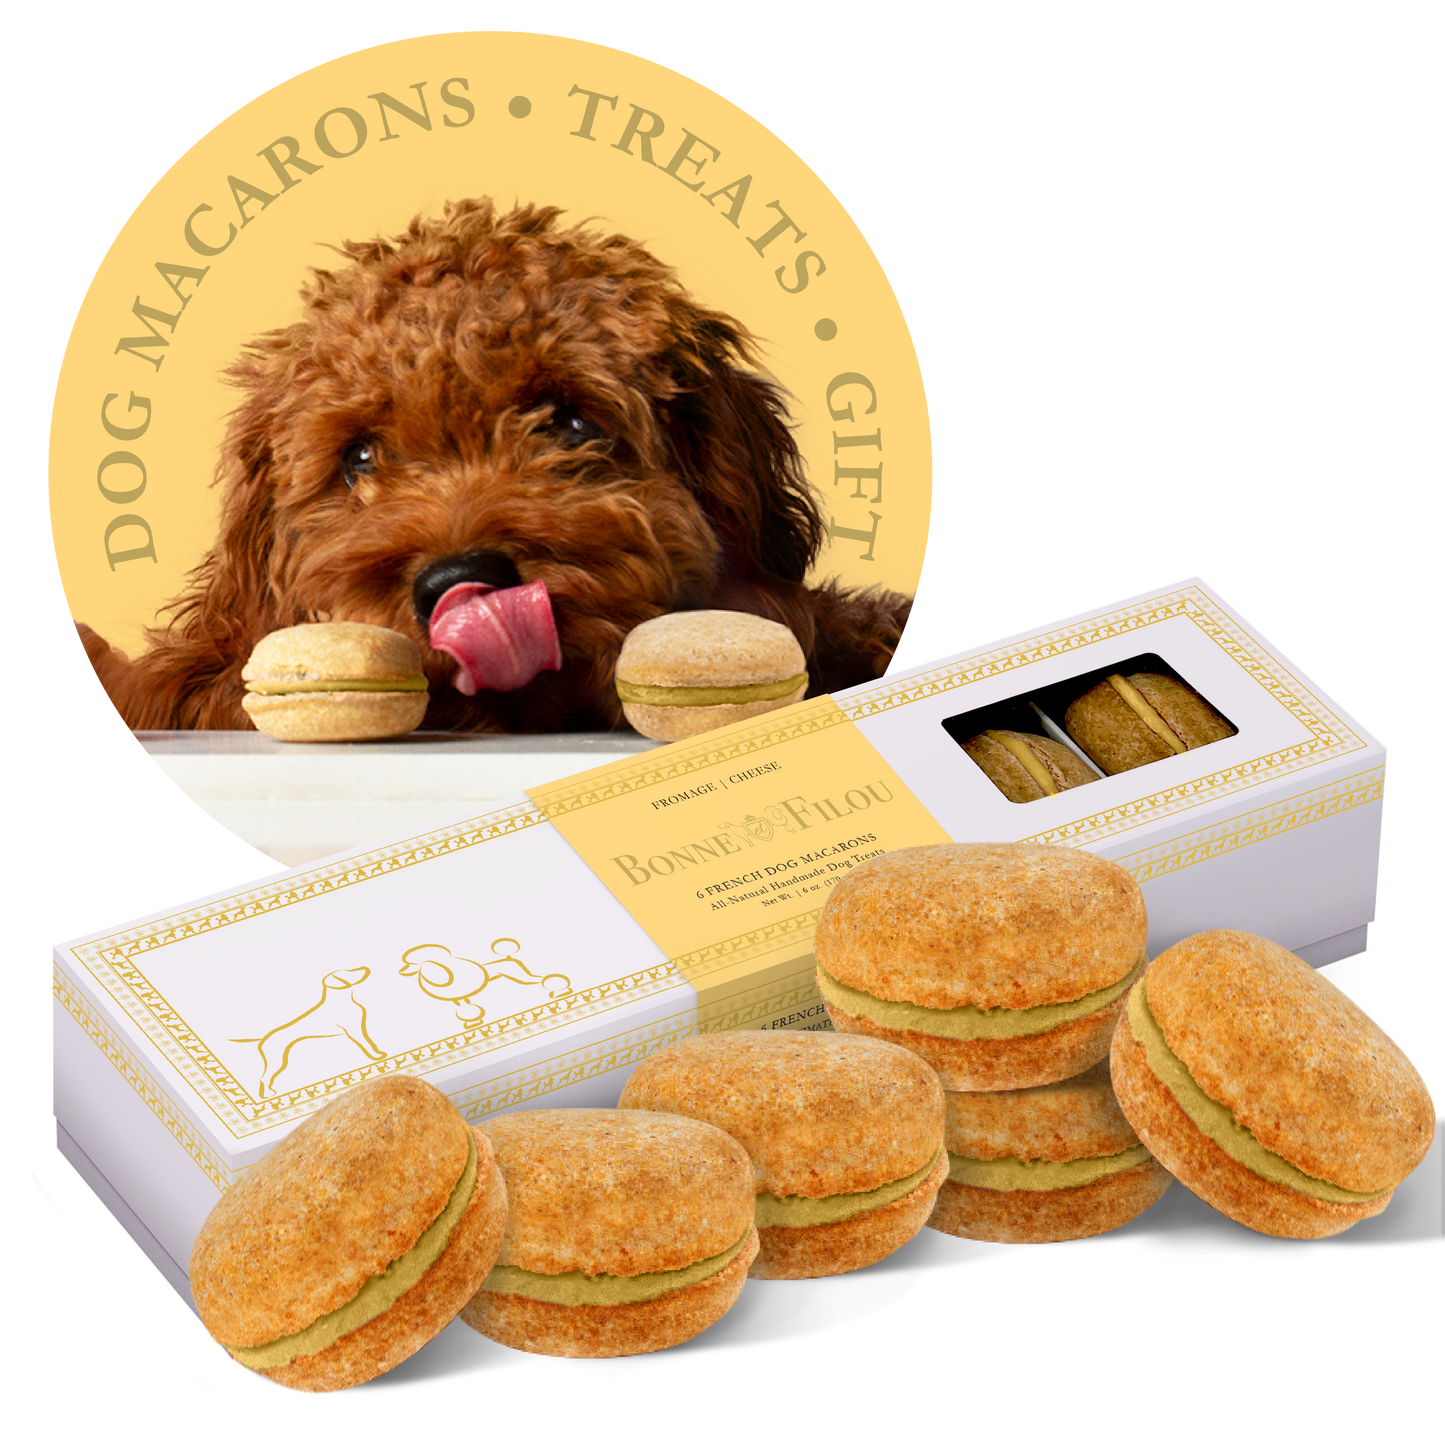 Dog Macarons (Count of 6 - window in packaging) by Bonne et Filou